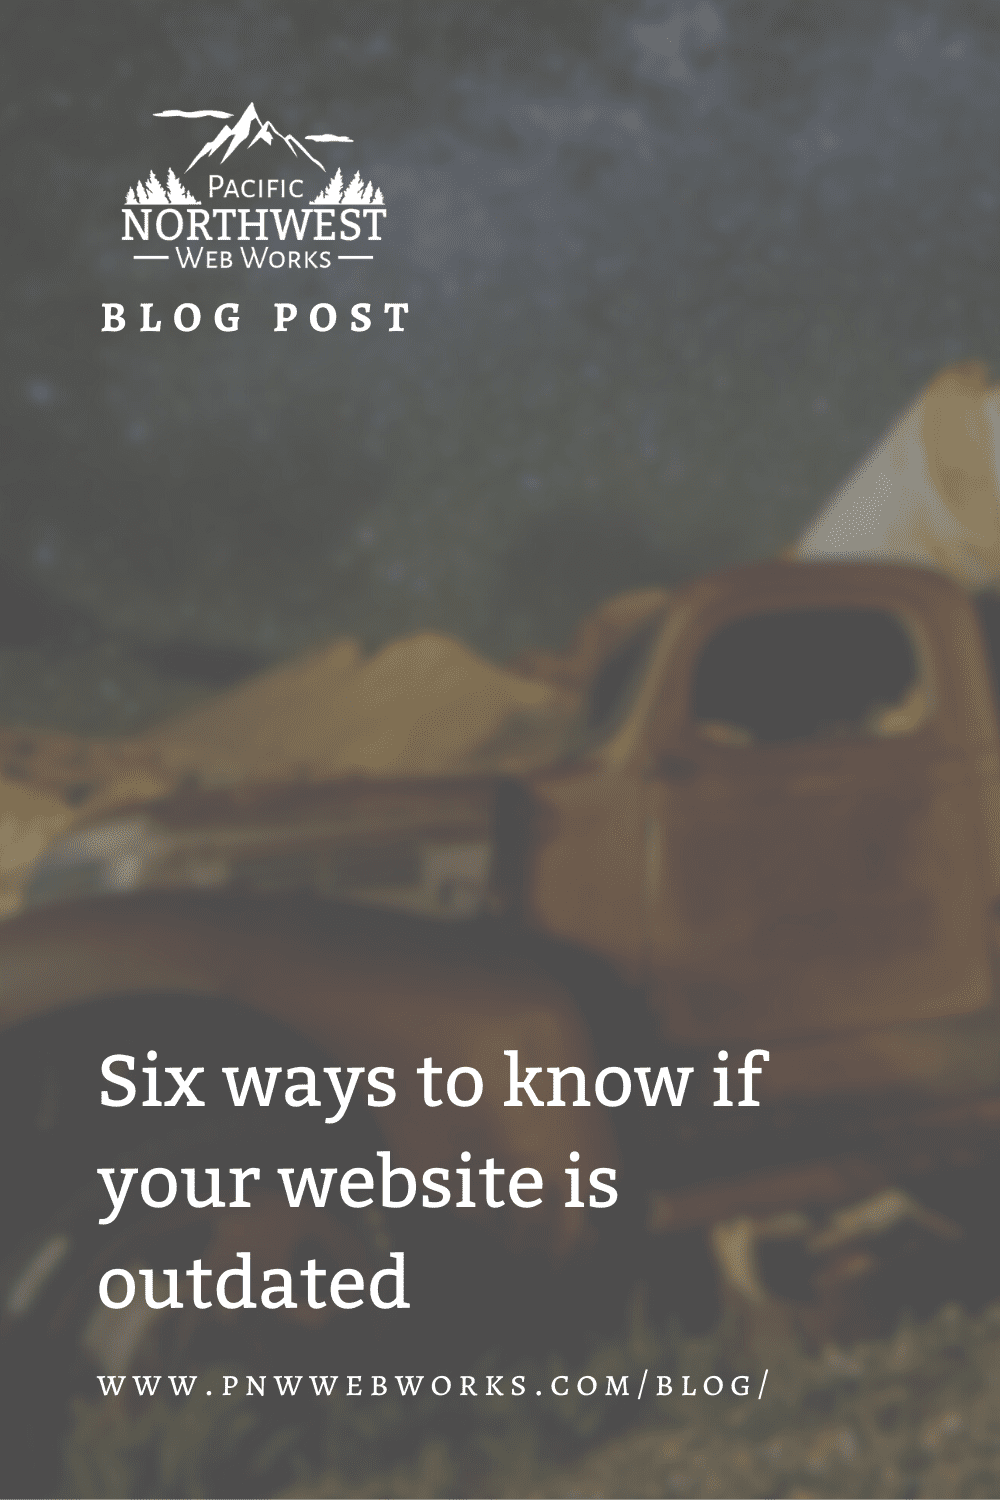 Six ways to know if your website is outdated